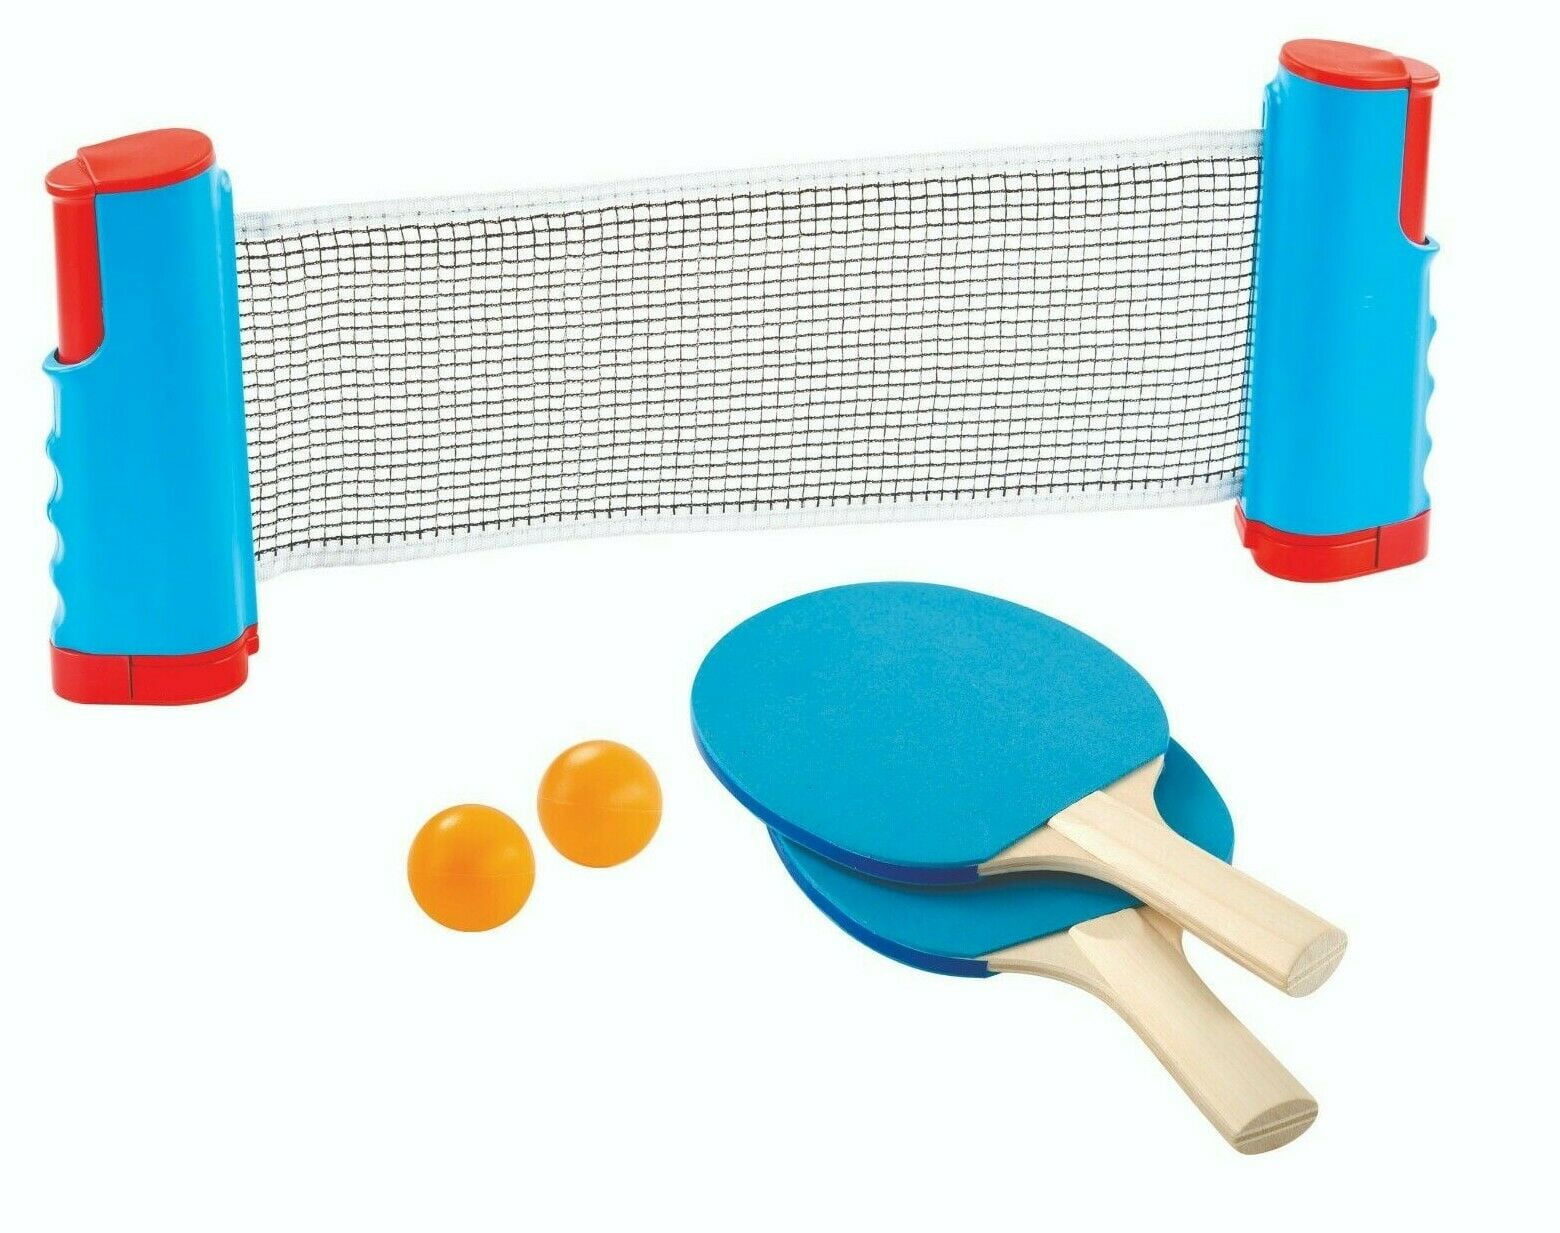 Ping Pong Paddle Set with Retractable Net for Any Table 12pcs Ping Pong Balls Storage Mesh Bag Portable Ping Pong Set for Indoor/Outdoor All-in-One Table Tennis Set w/ 2 Rackets 